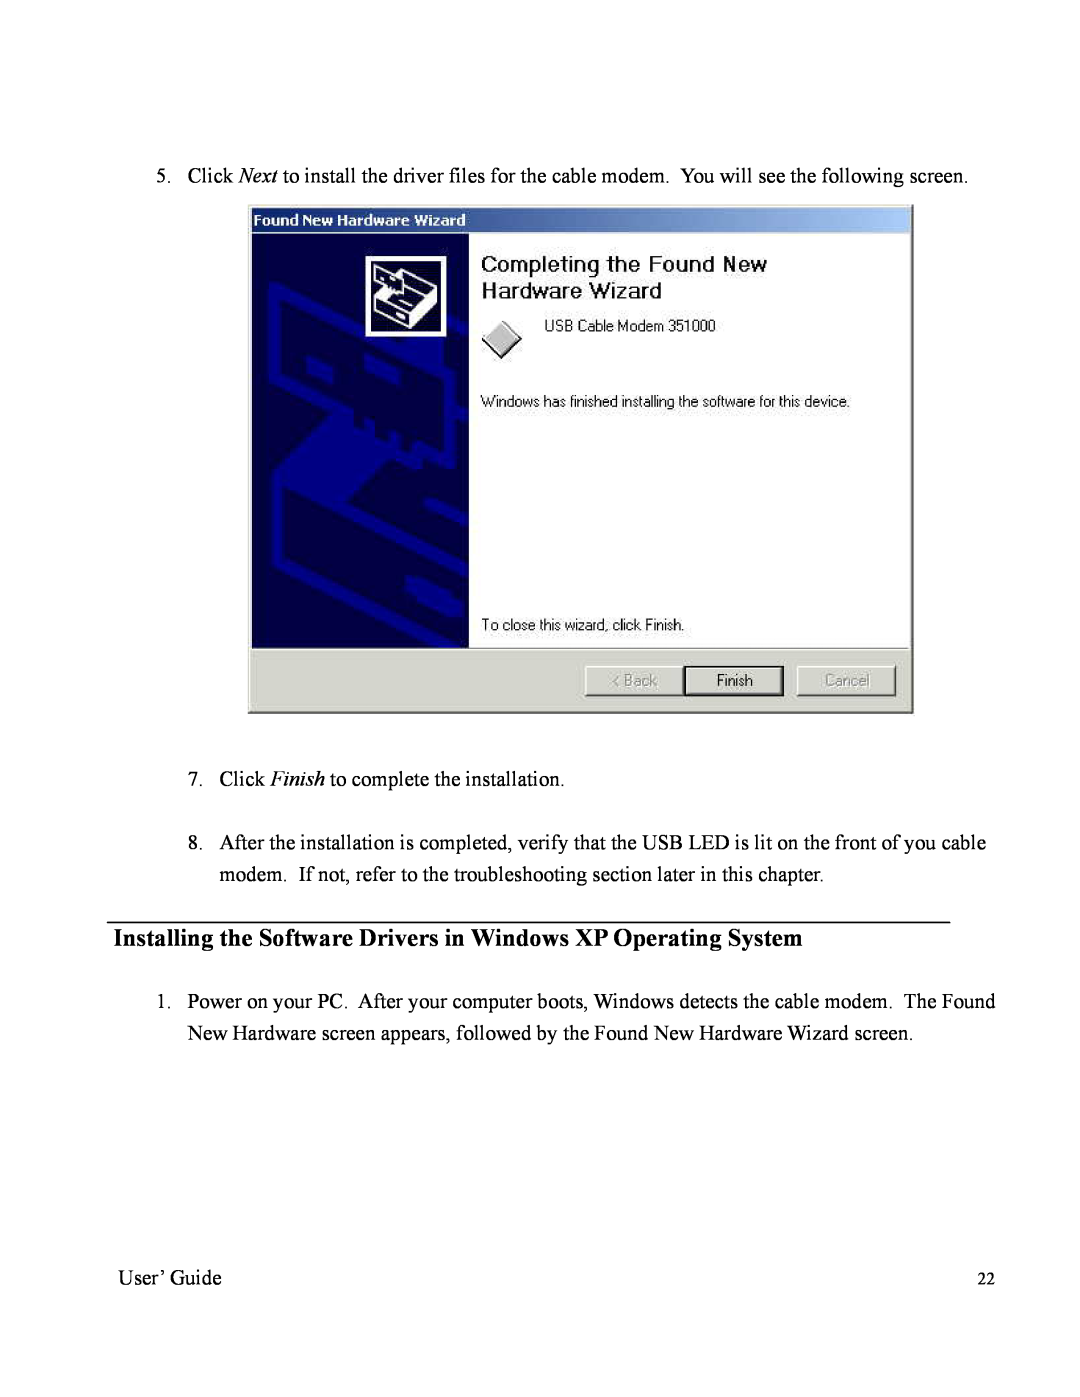 Orion 2000 manual Installing the Software Drivers in Windows XP Operating System 